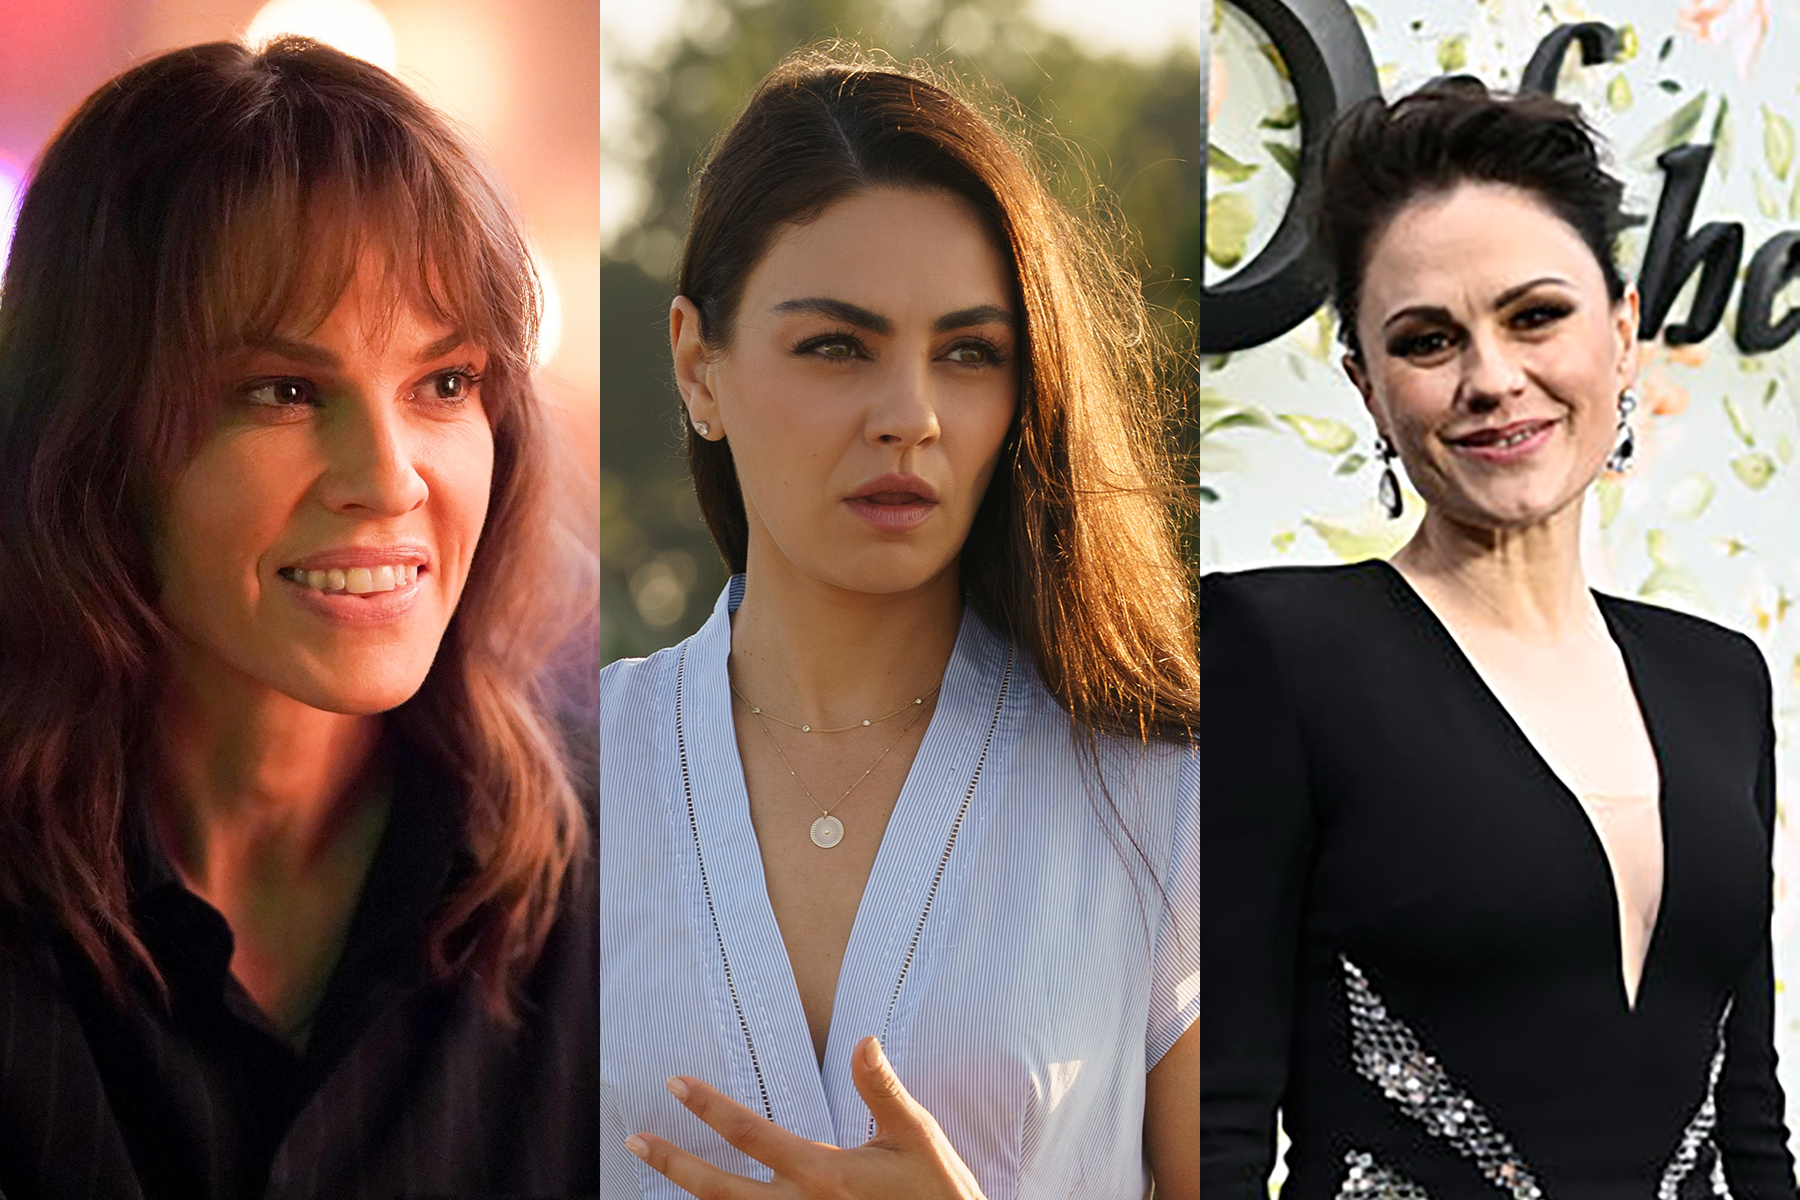 Missy Porn Star Dead - TV best bets with Hilary Swank, Mila Kunis, Anna Paquin, 'Grey's Anatomy,'  'Young Sheldon'